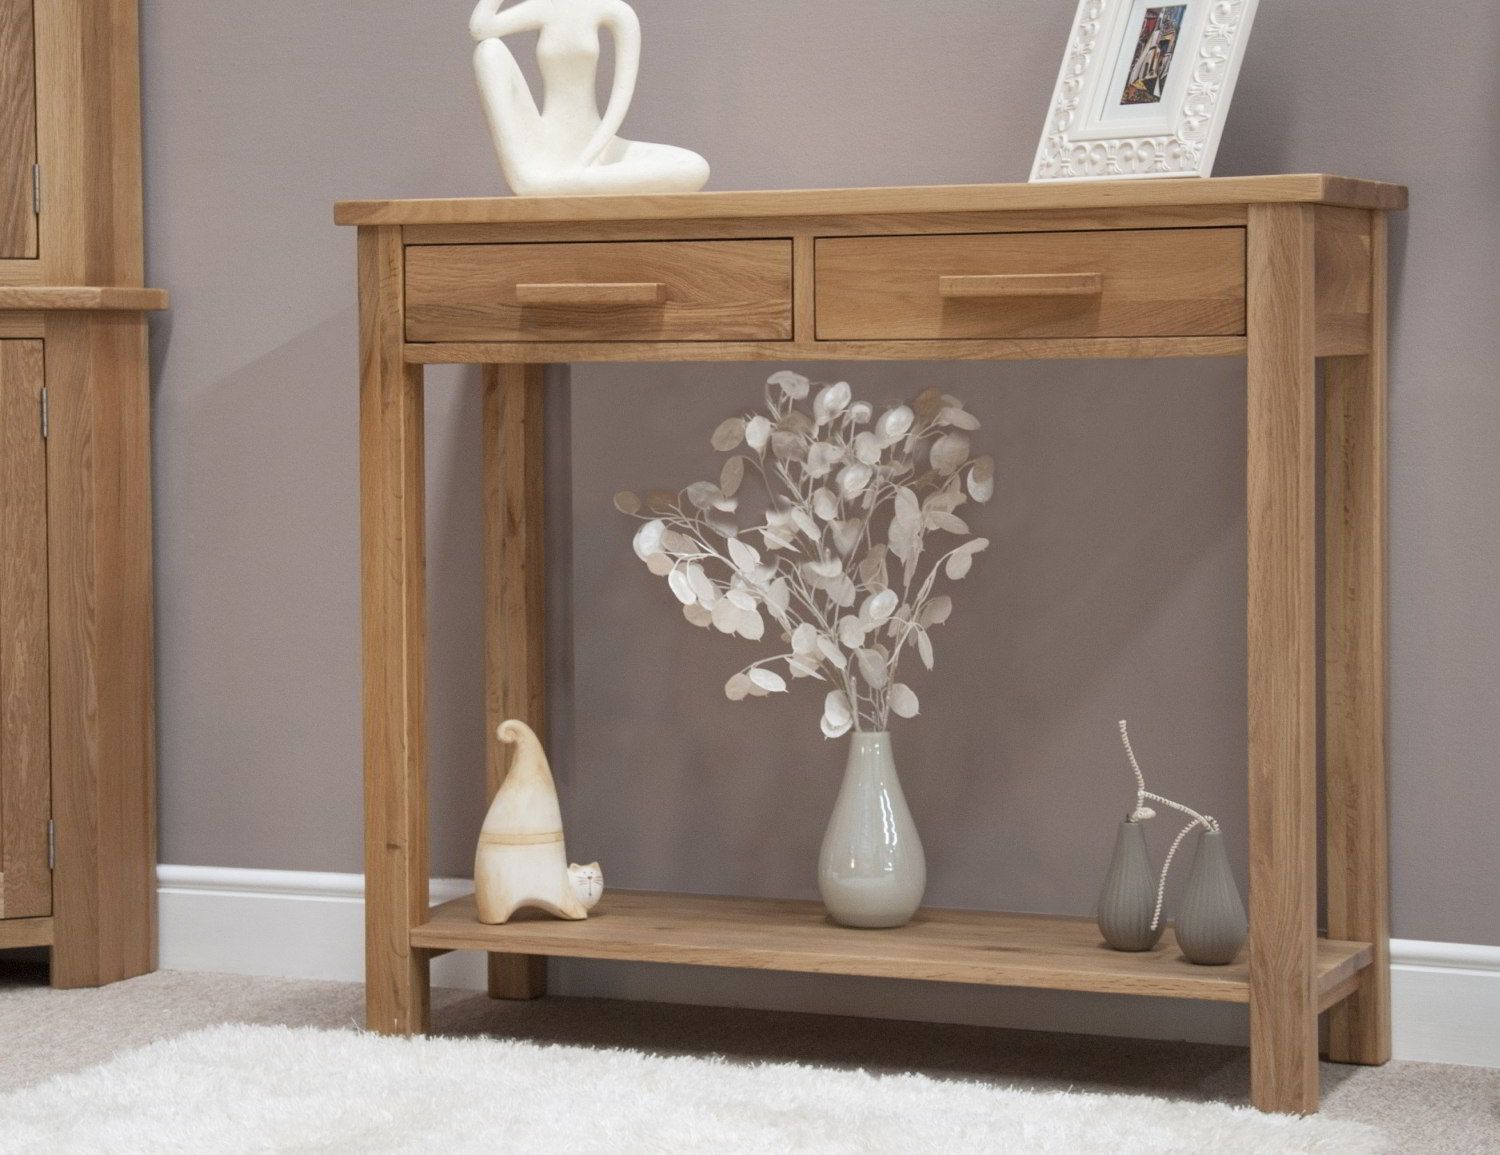 Eton Solid Oak Modern Furniture Hallway Hall Console Table In Large Modern Console Tables (View 3 of 20)